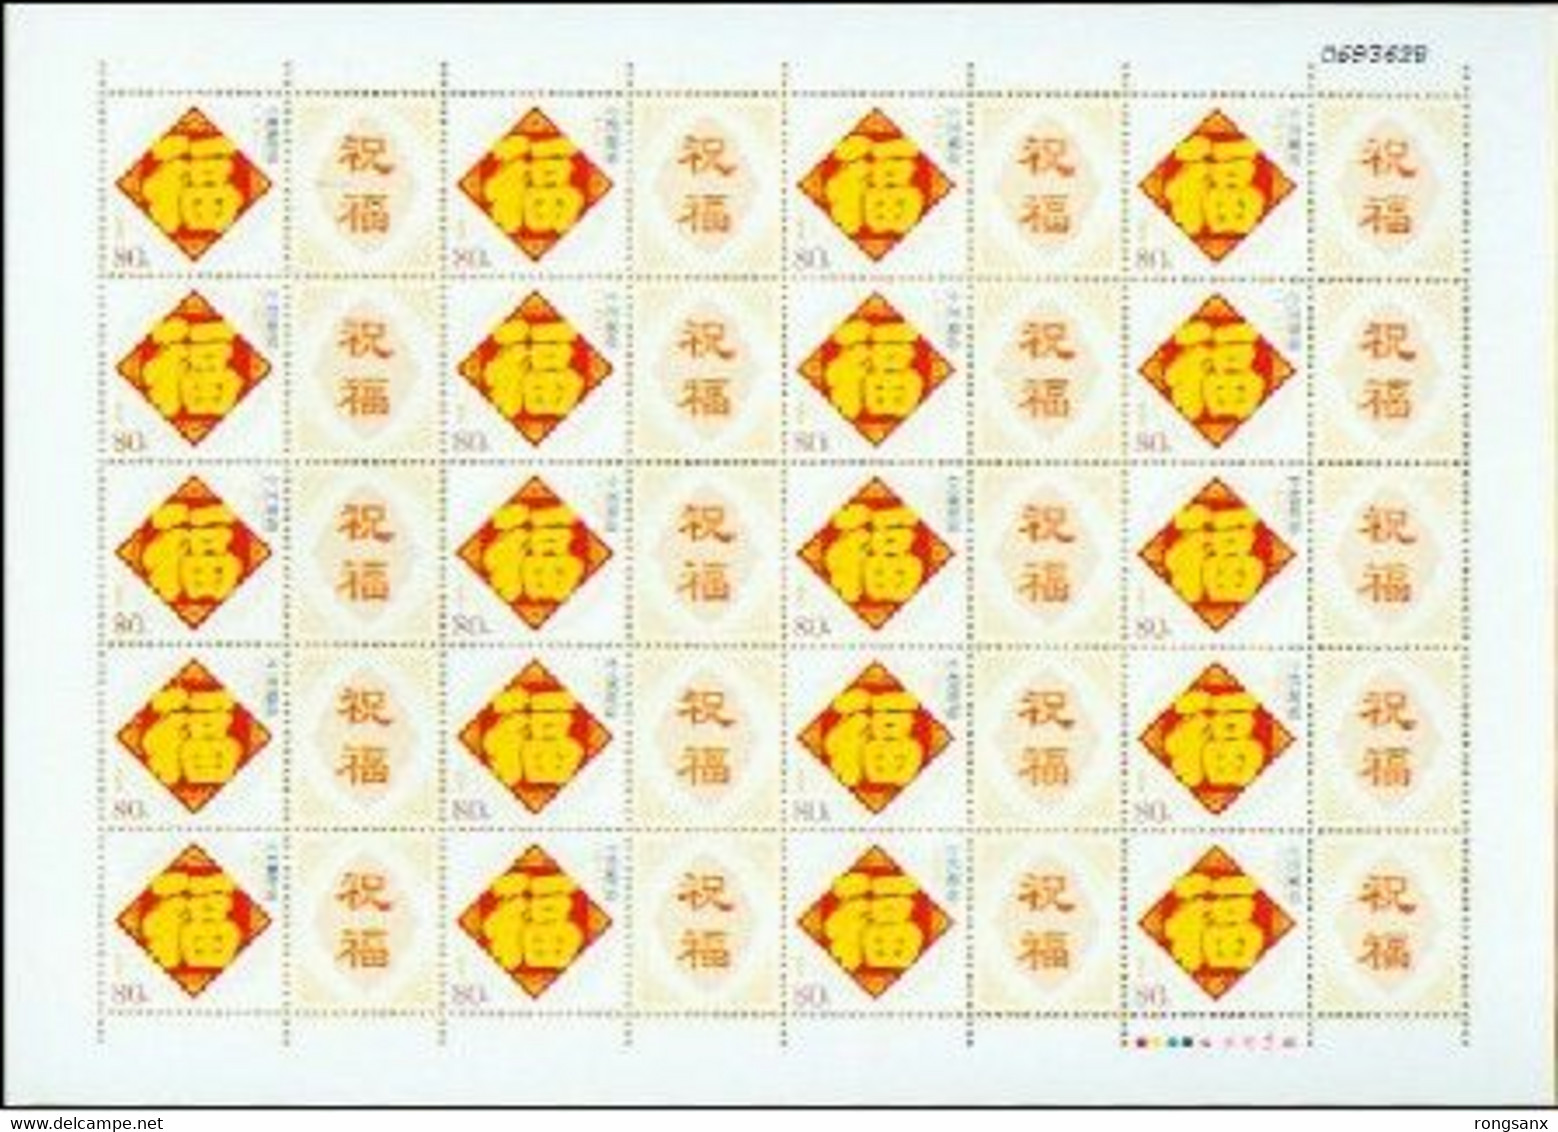 2005 CHINA G-9 GREETING STAMP LUCKY WORDS F-SHEET - Blocs-feuillets